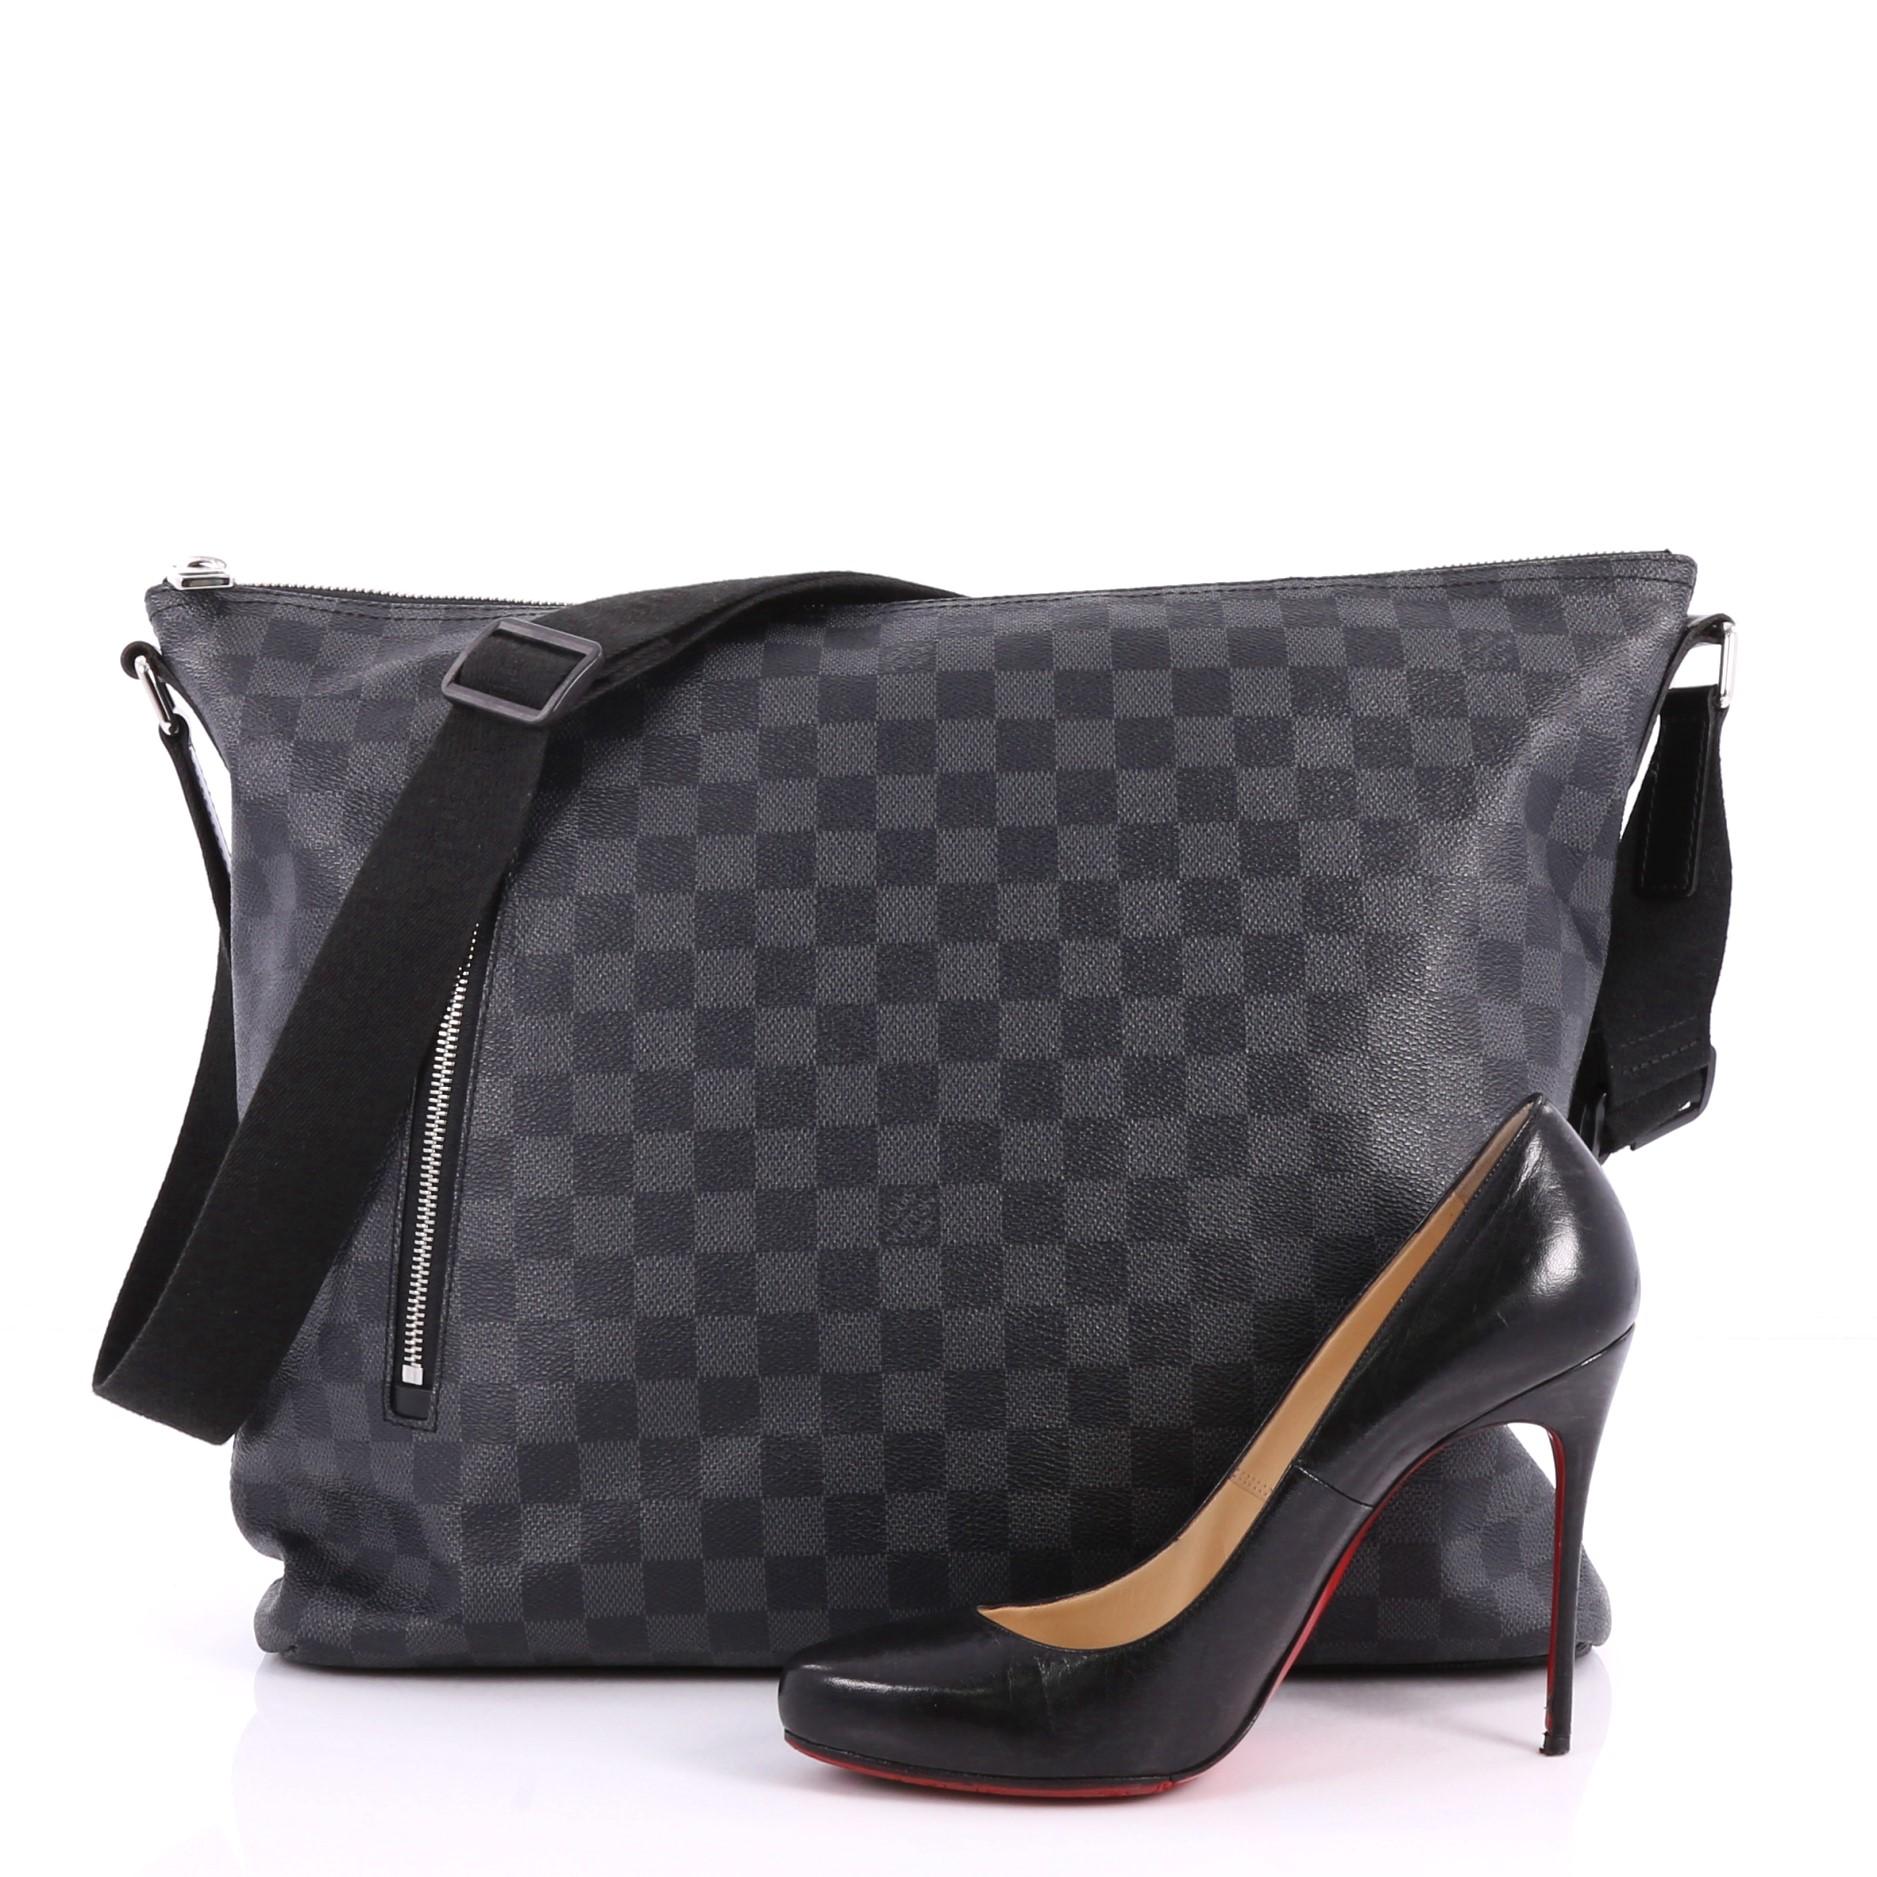 This authentic Louis Vuitton Mick Handbag Damier Graphite GM showcases an urban-city spirit, making it ideal for everyday excursions. Crafted from damier graphite coated canvas, this stylish messenger bag features an adjustable shoulder strap, black